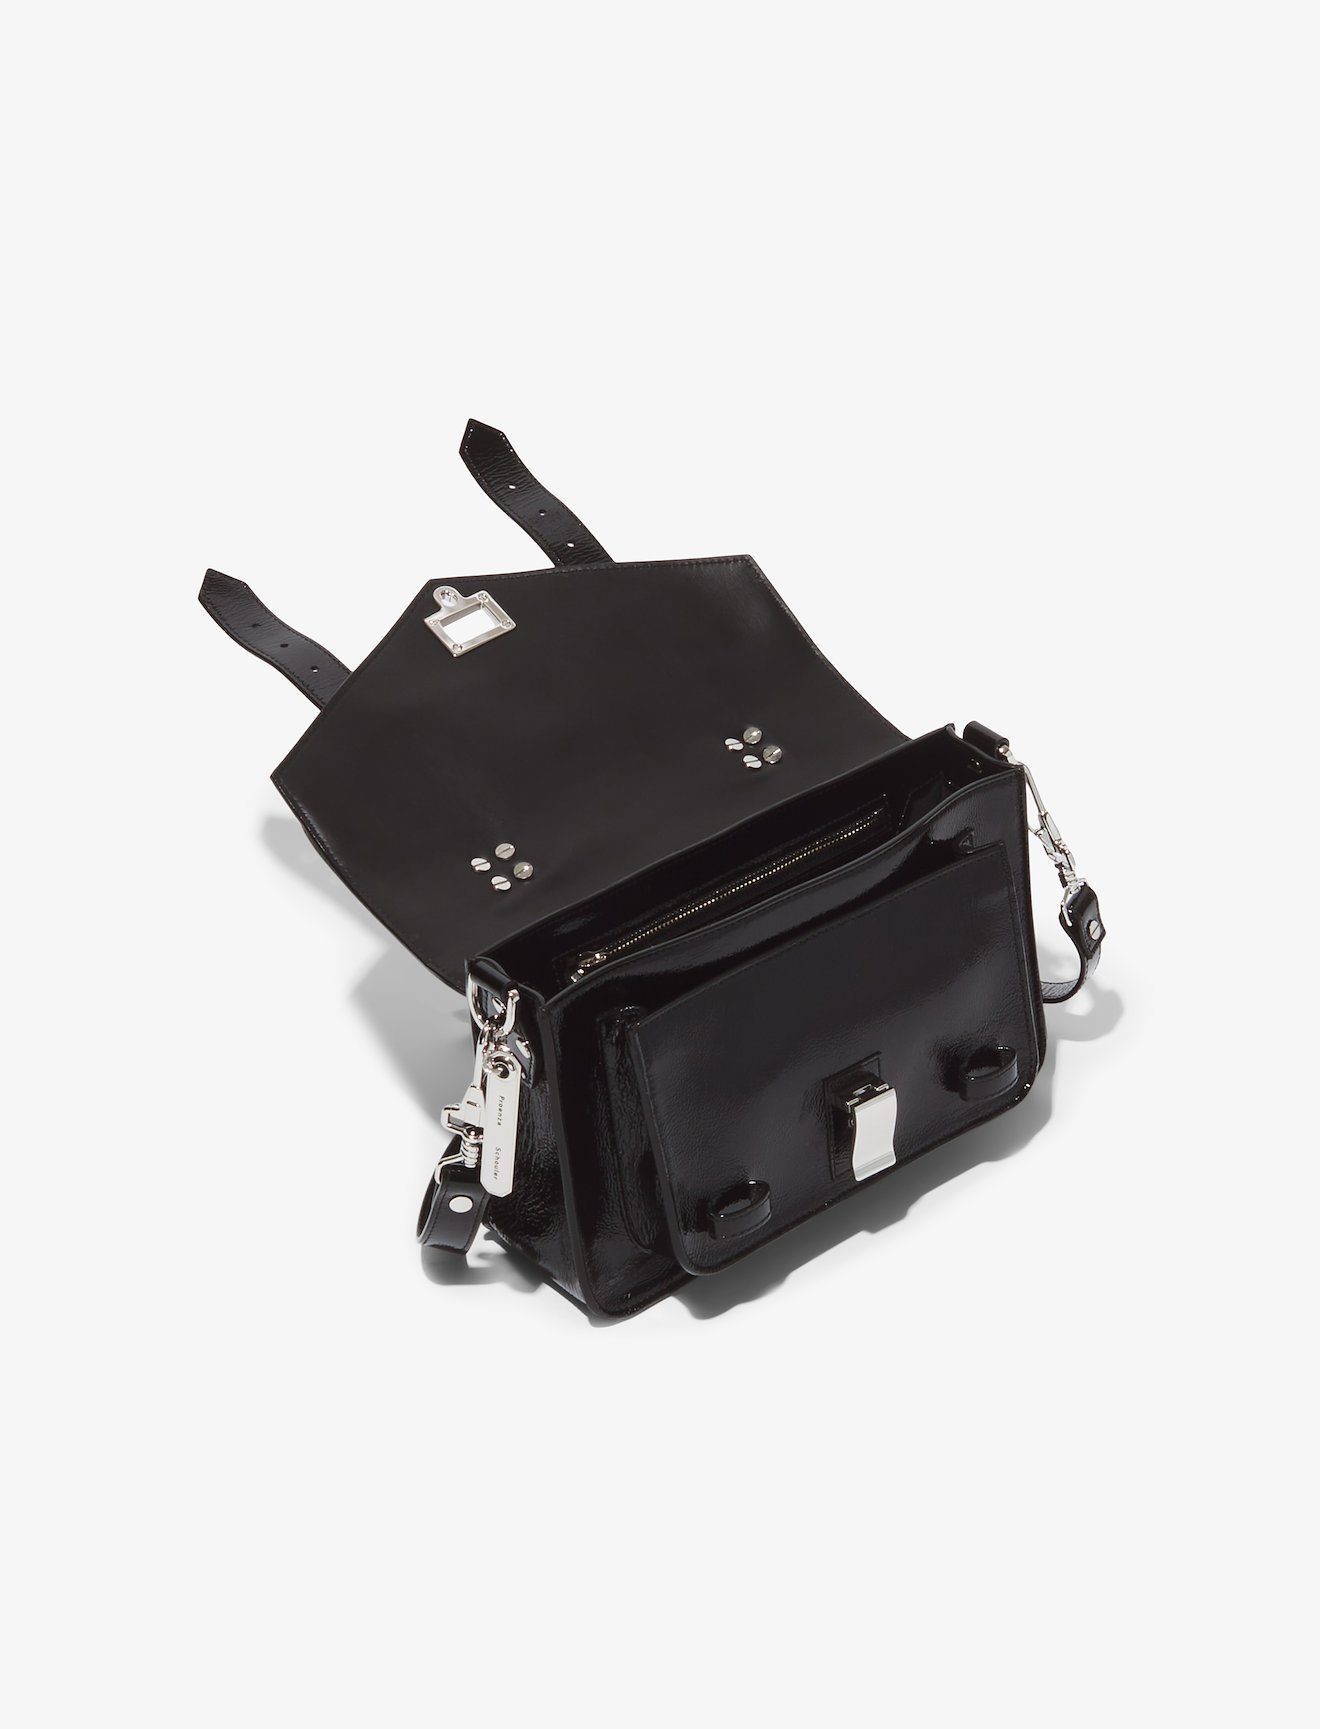 Crinkled Patent PS1 Tiny Bag #4